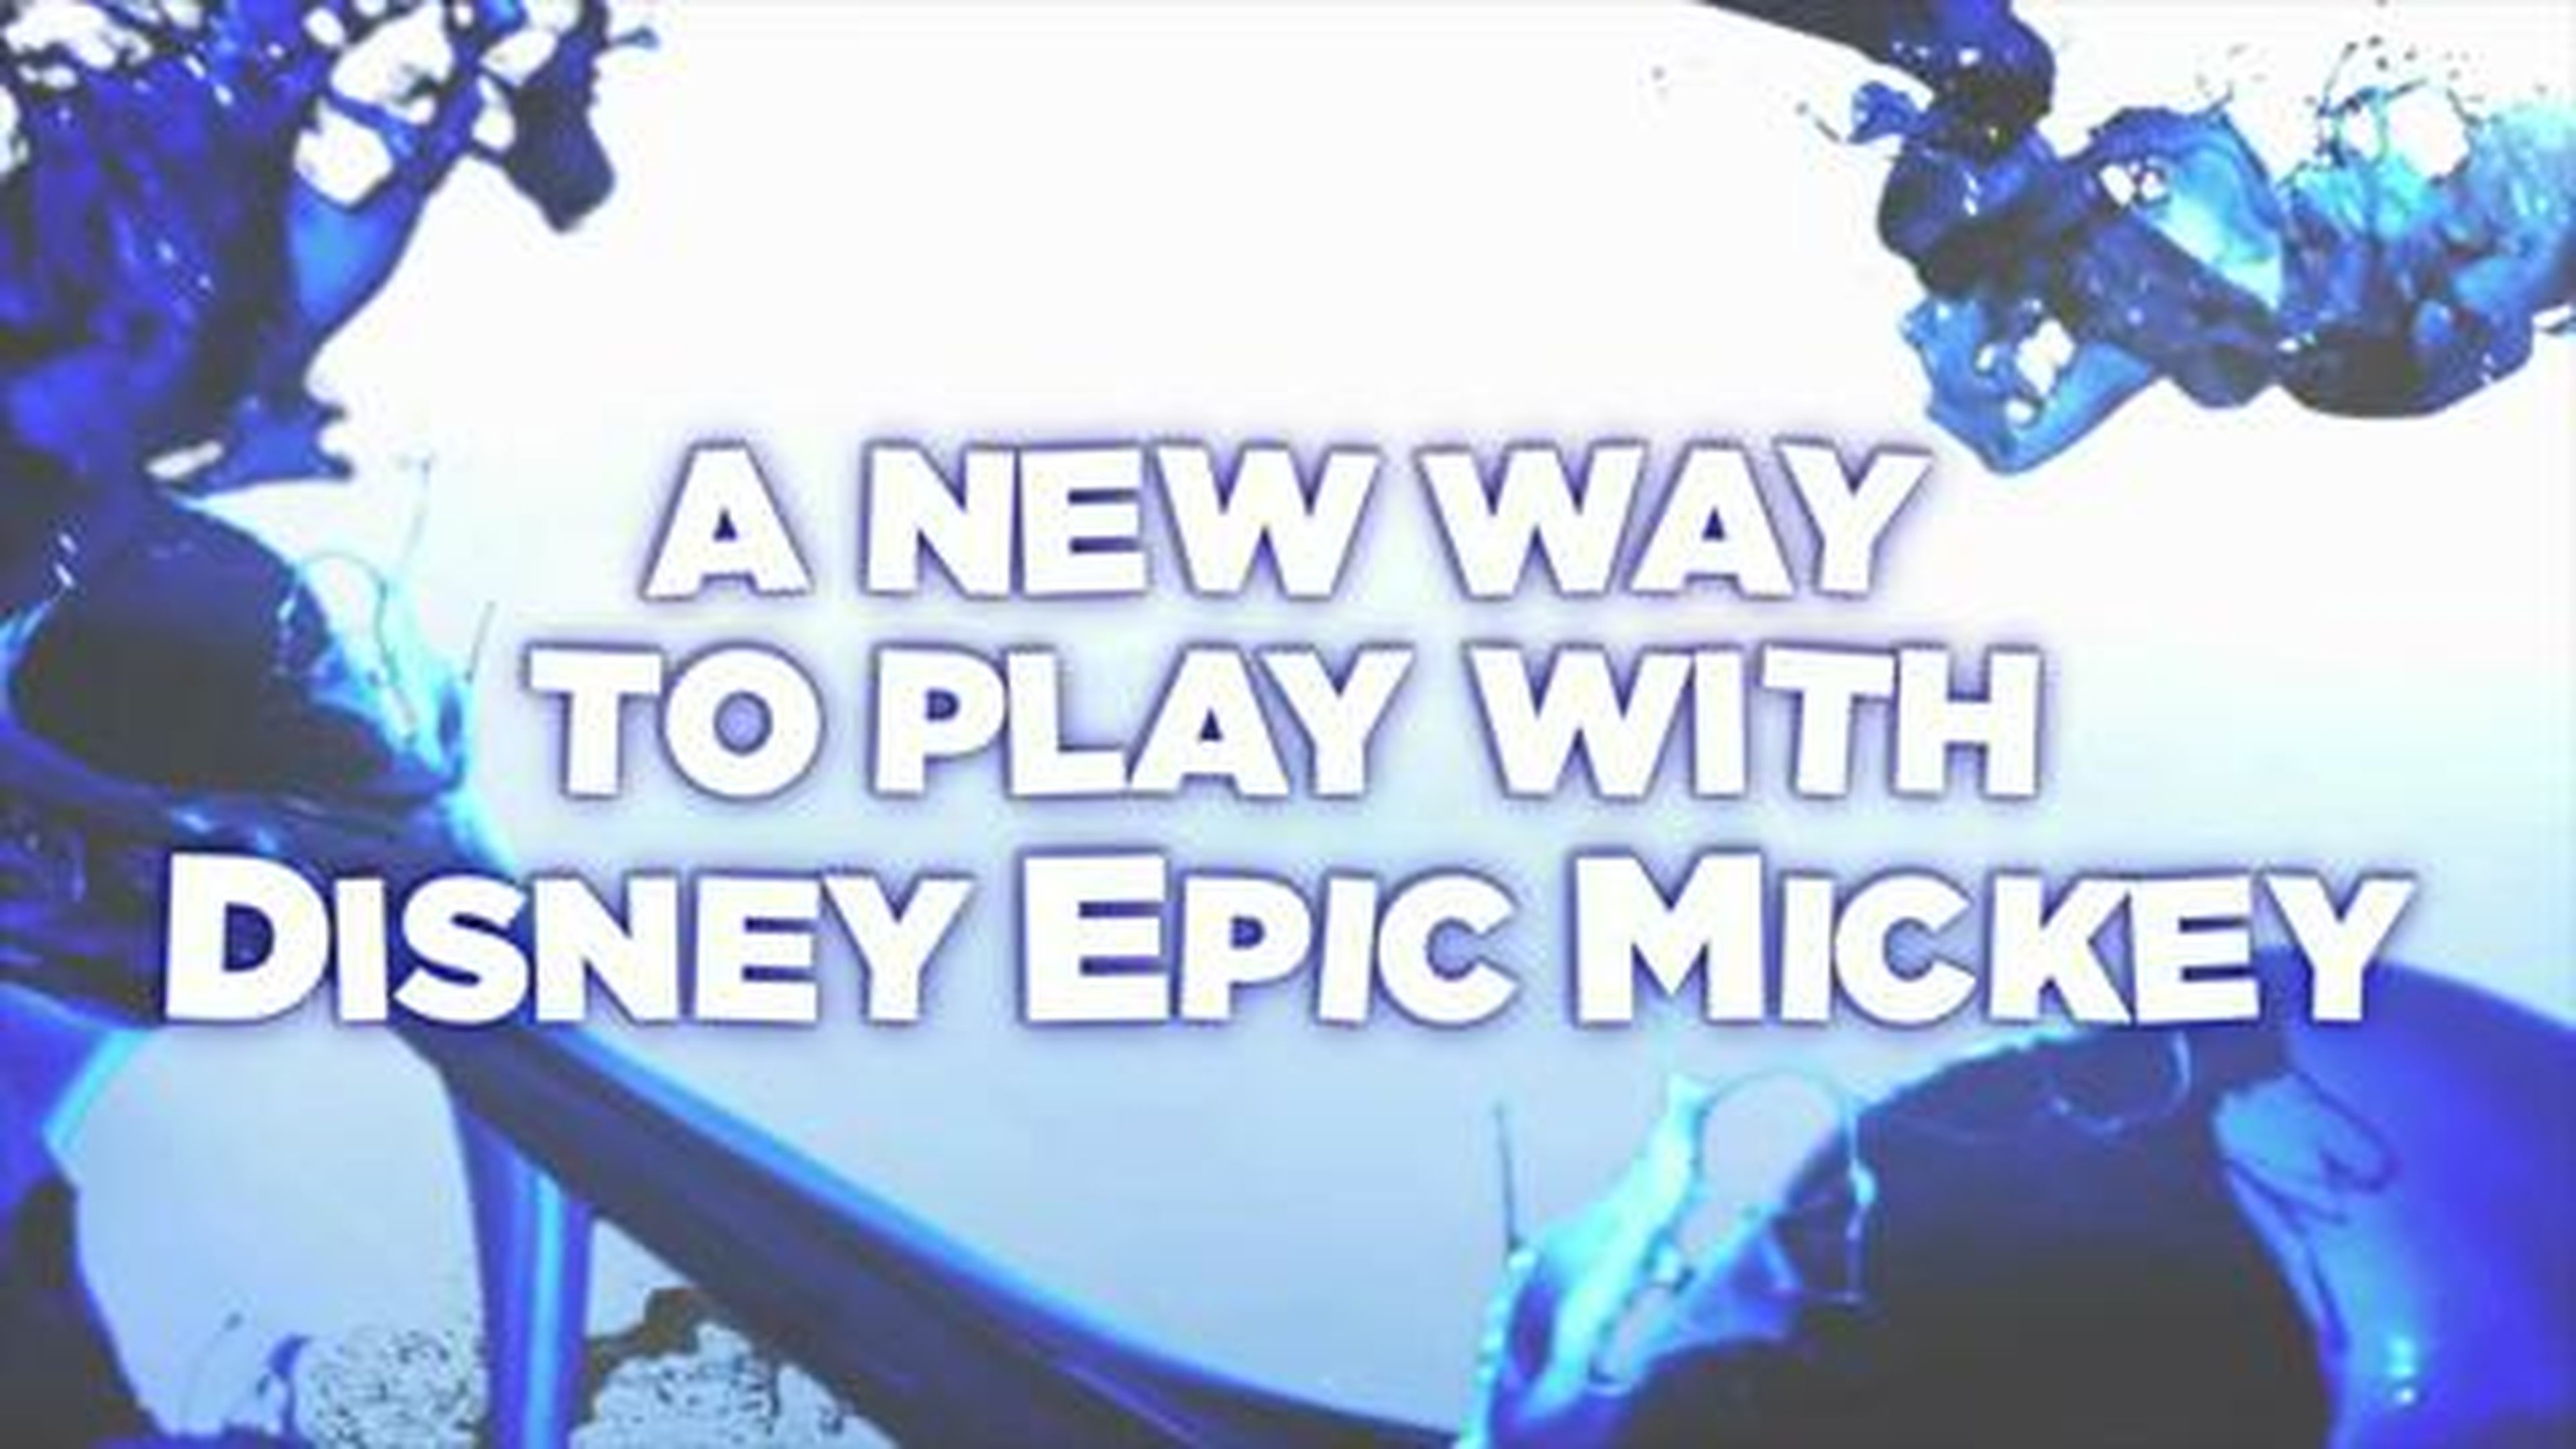 Disney Epic Mickey 2- The Power of Two